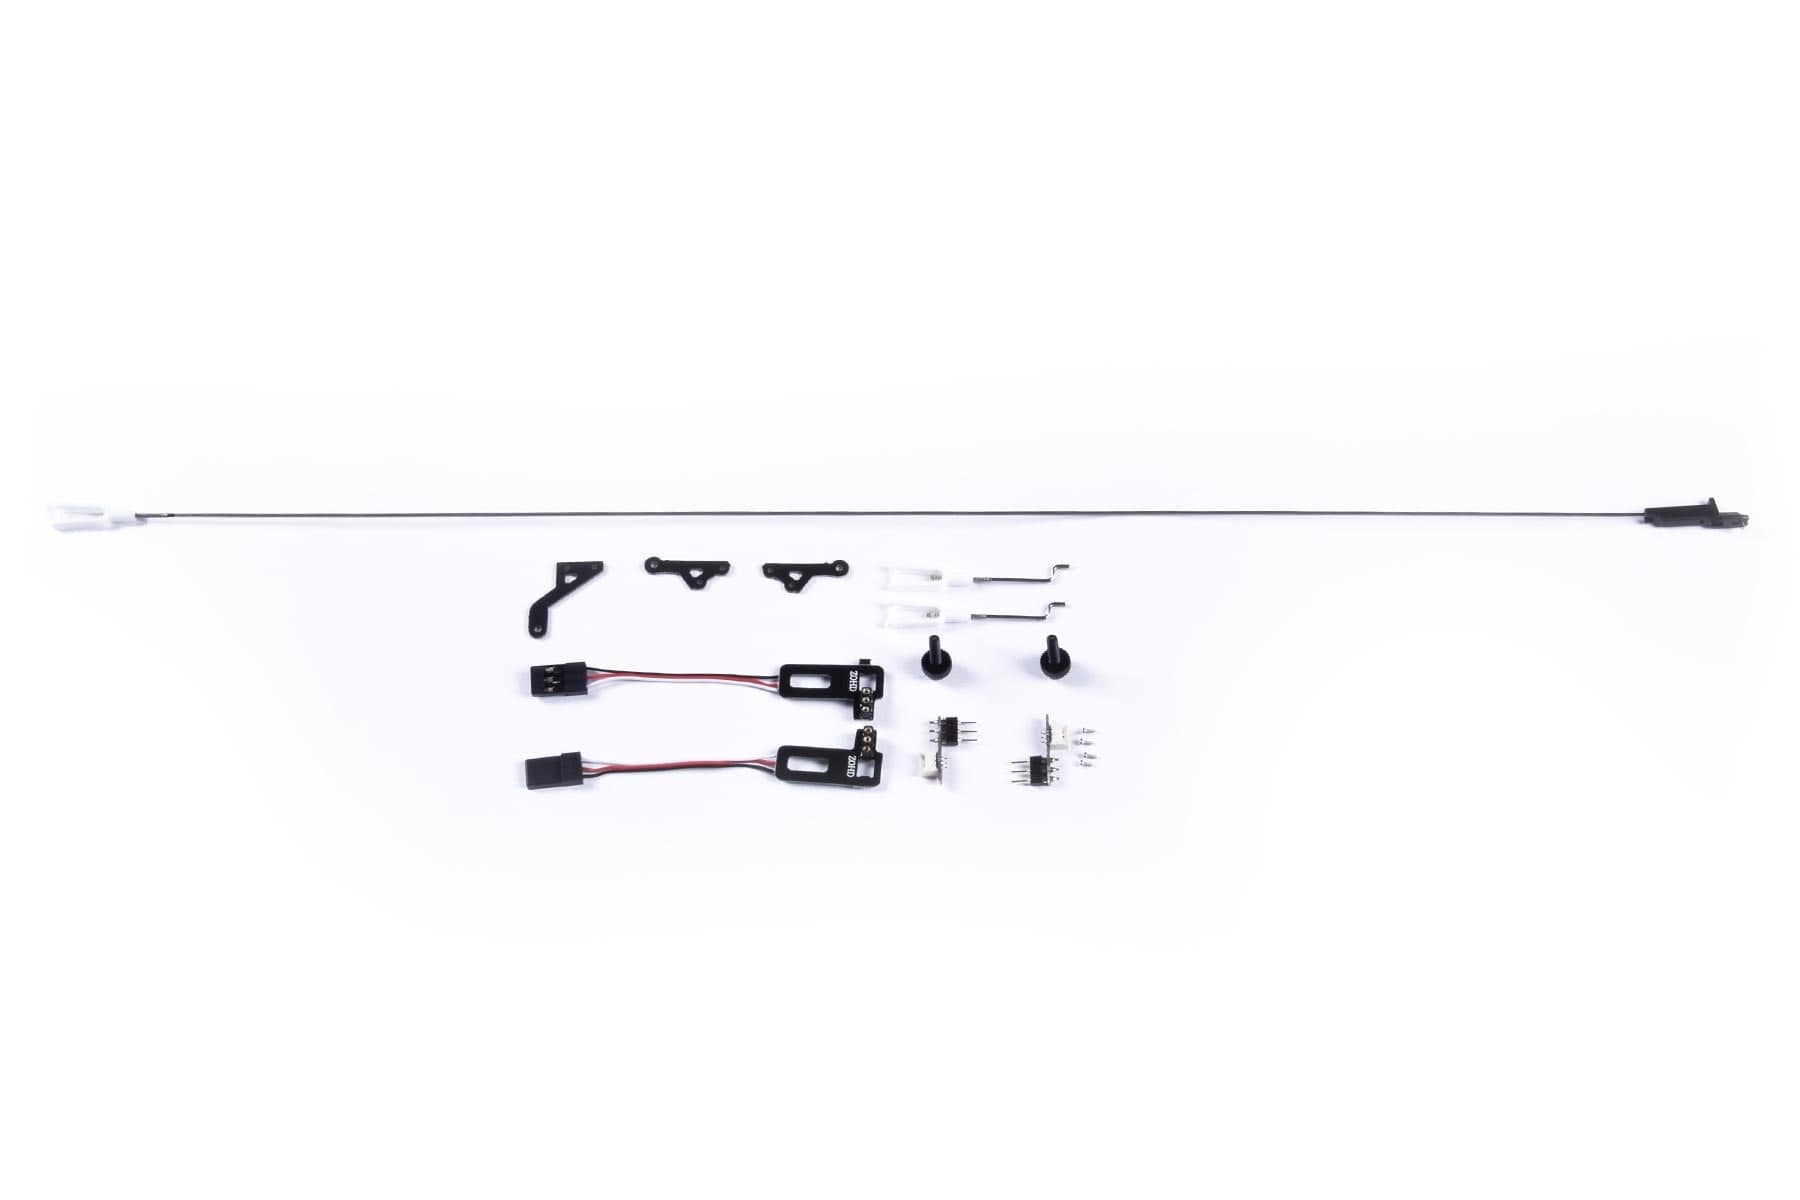 ZOHD 877mm Drift FPV Glider Control Horns And Pushrods With Connectors ZOH10060-109